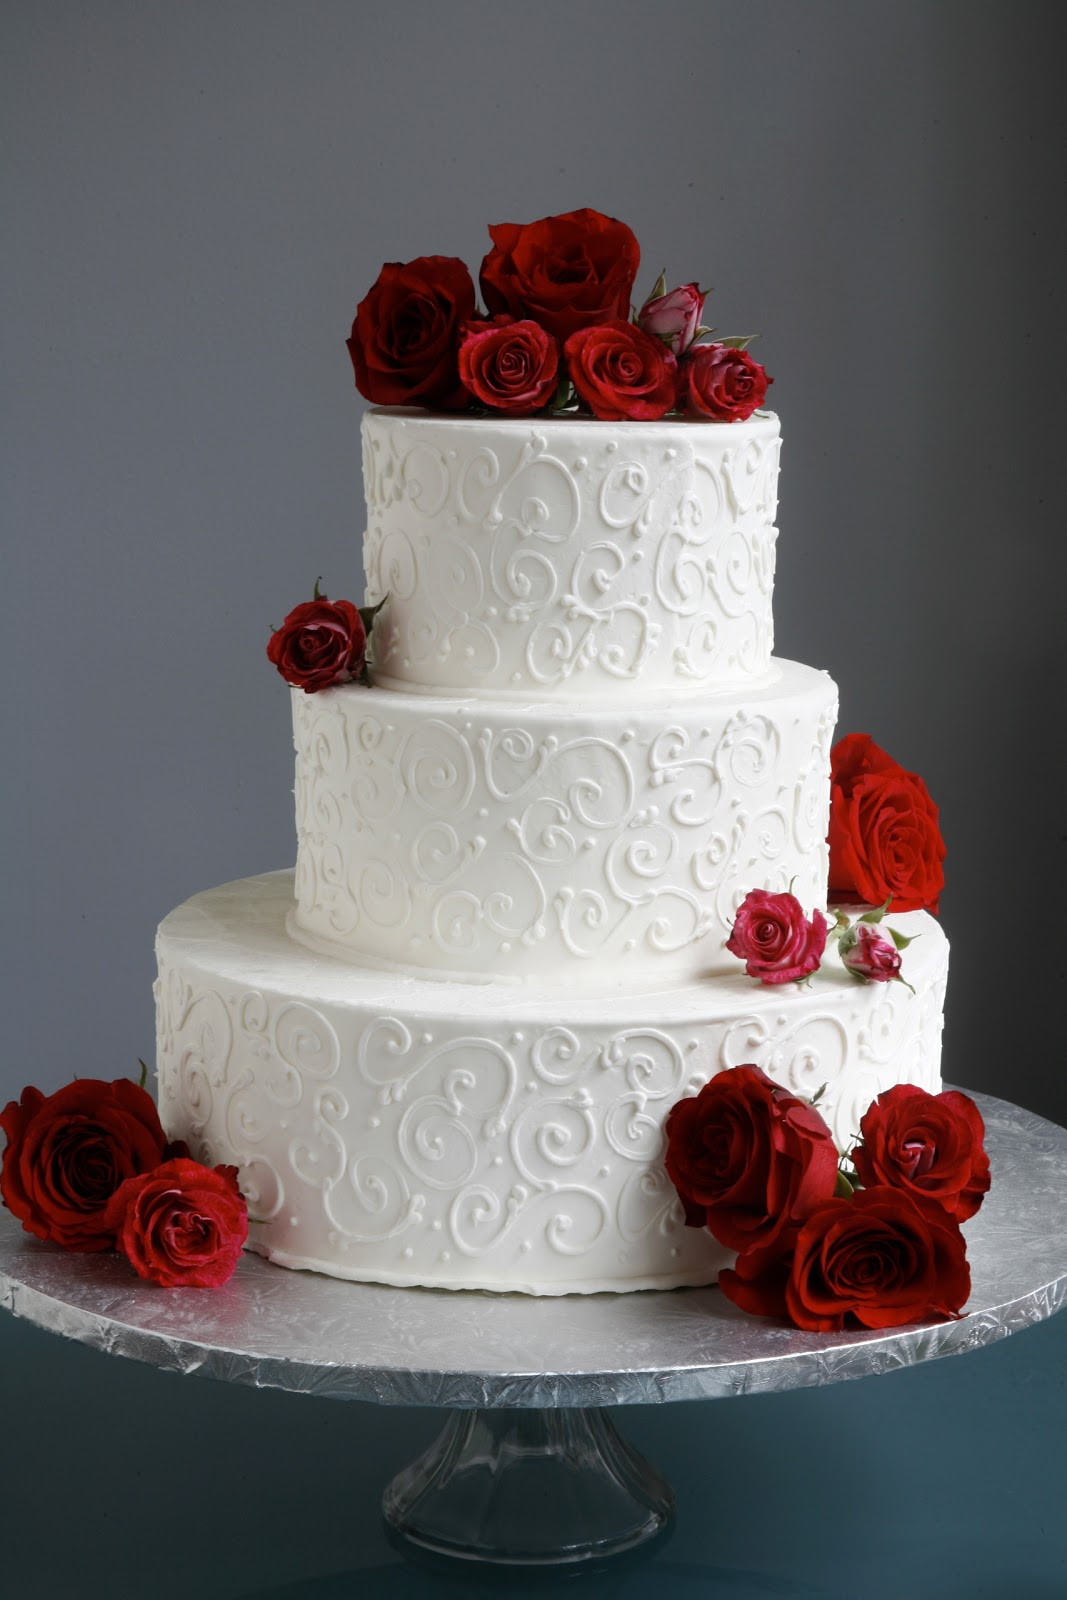 White Wedding Cake With Red Roses
 A Simple Cake Wedding Cake with Fresh Flowers From